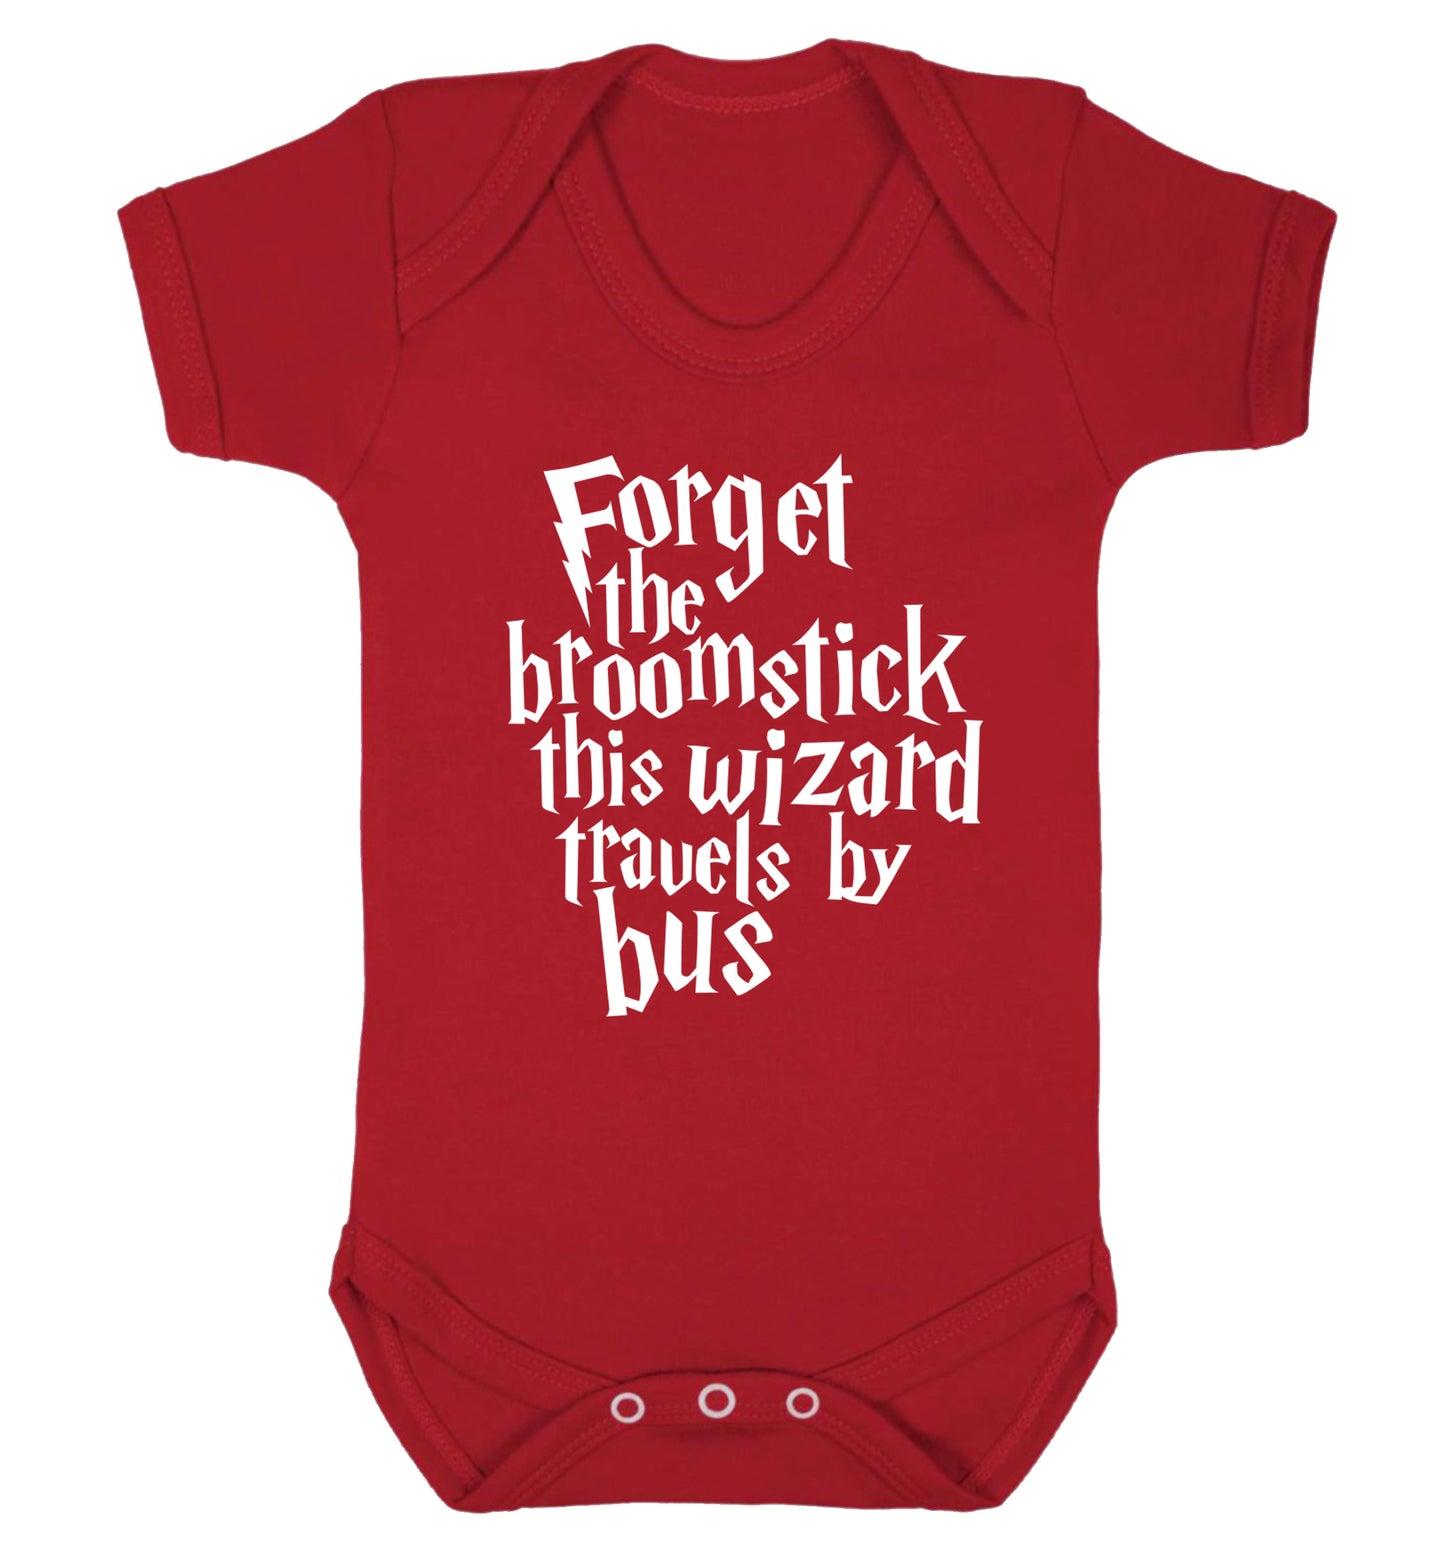 Forget the broomstick this wizard travels by bus Baby Vest red 18-24 months